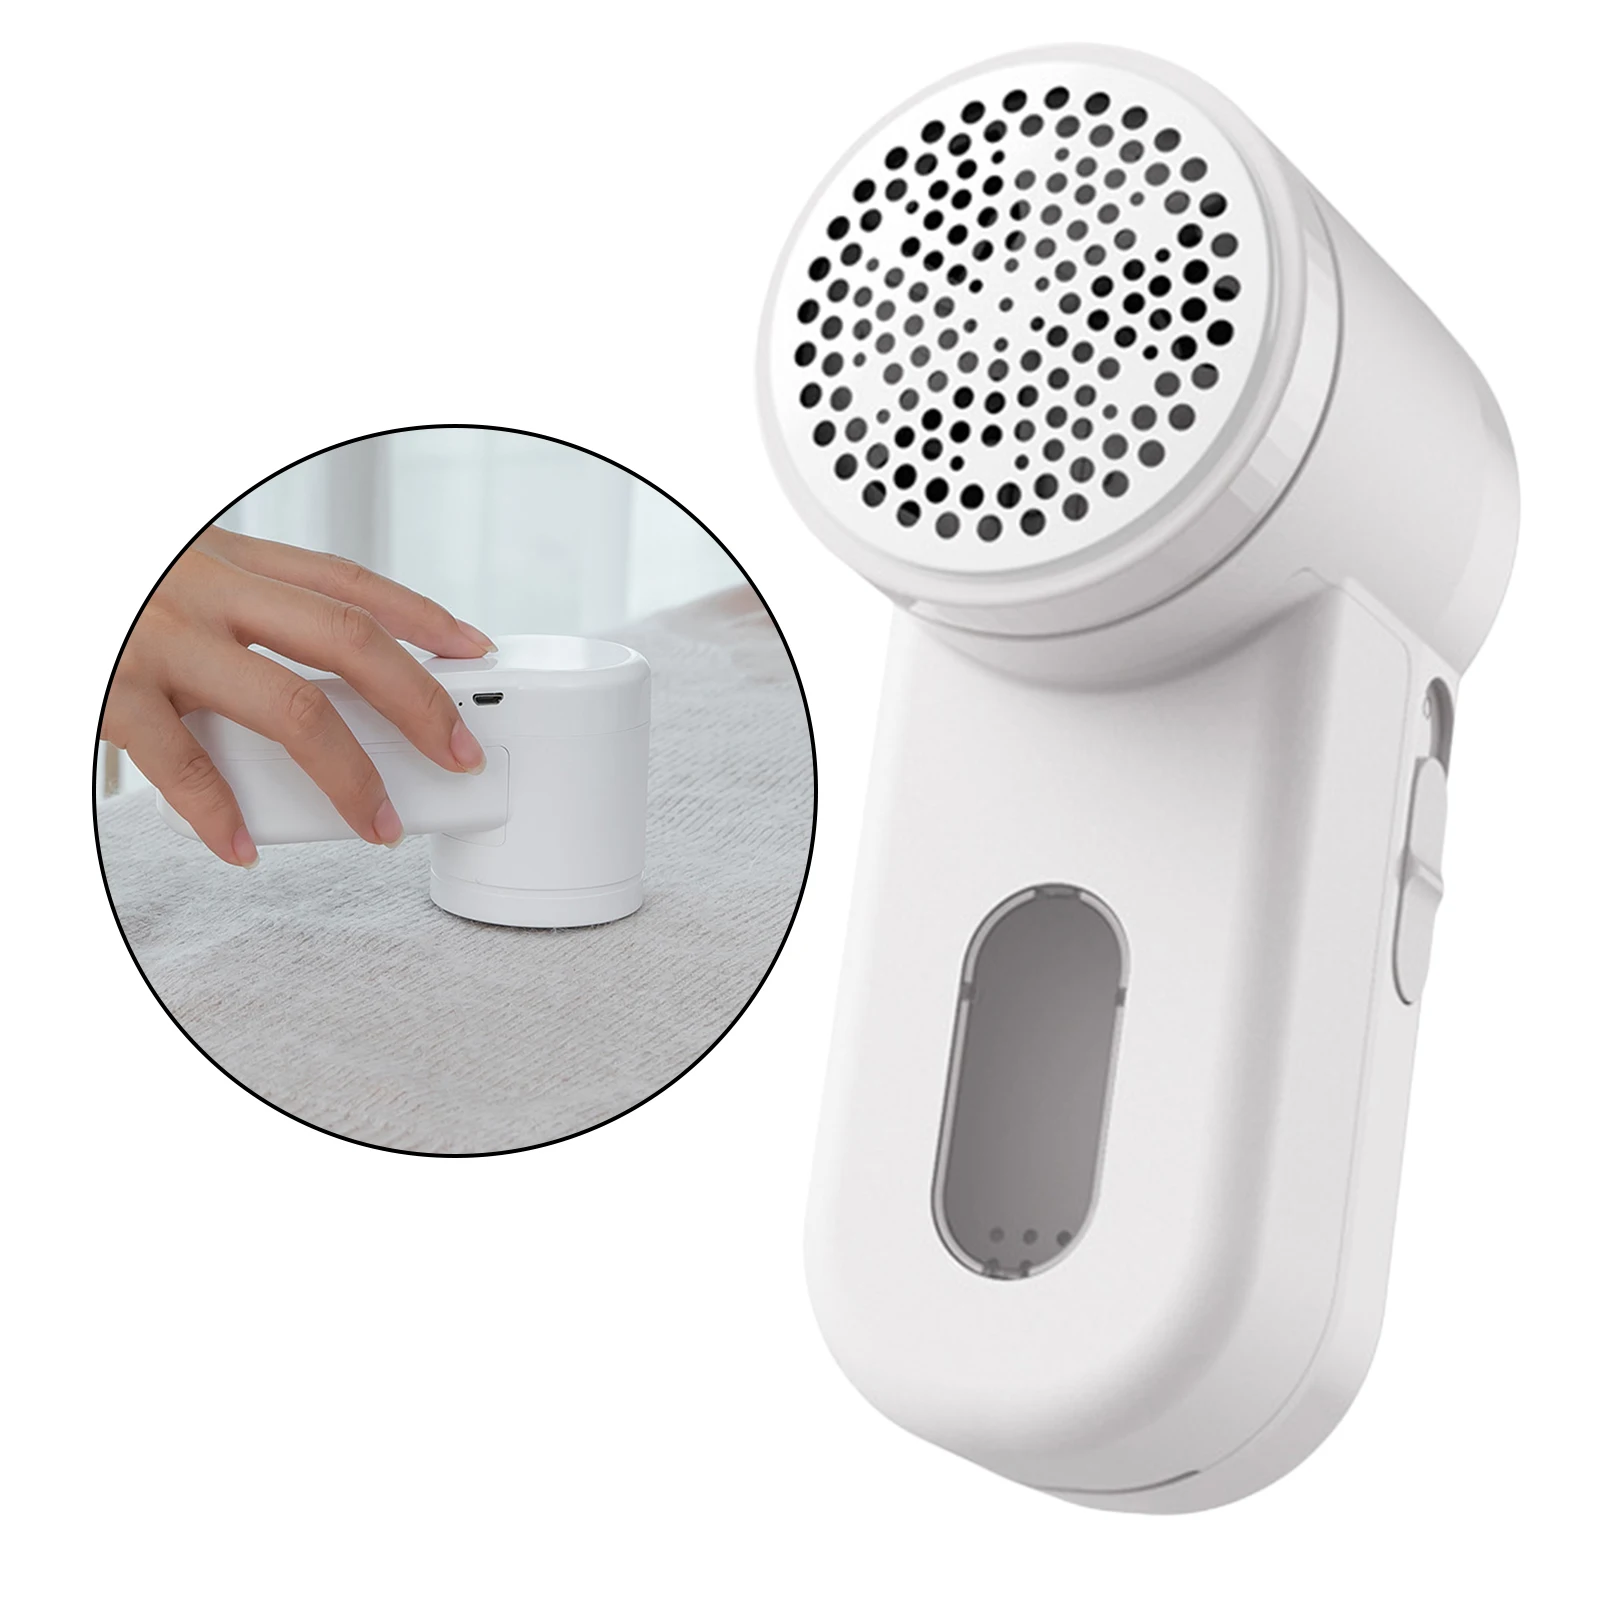 Portable USB Rechargeable Lint Remover Clothes Sweater Clothes Fuzz Pill Fuzz Remover Cleaner